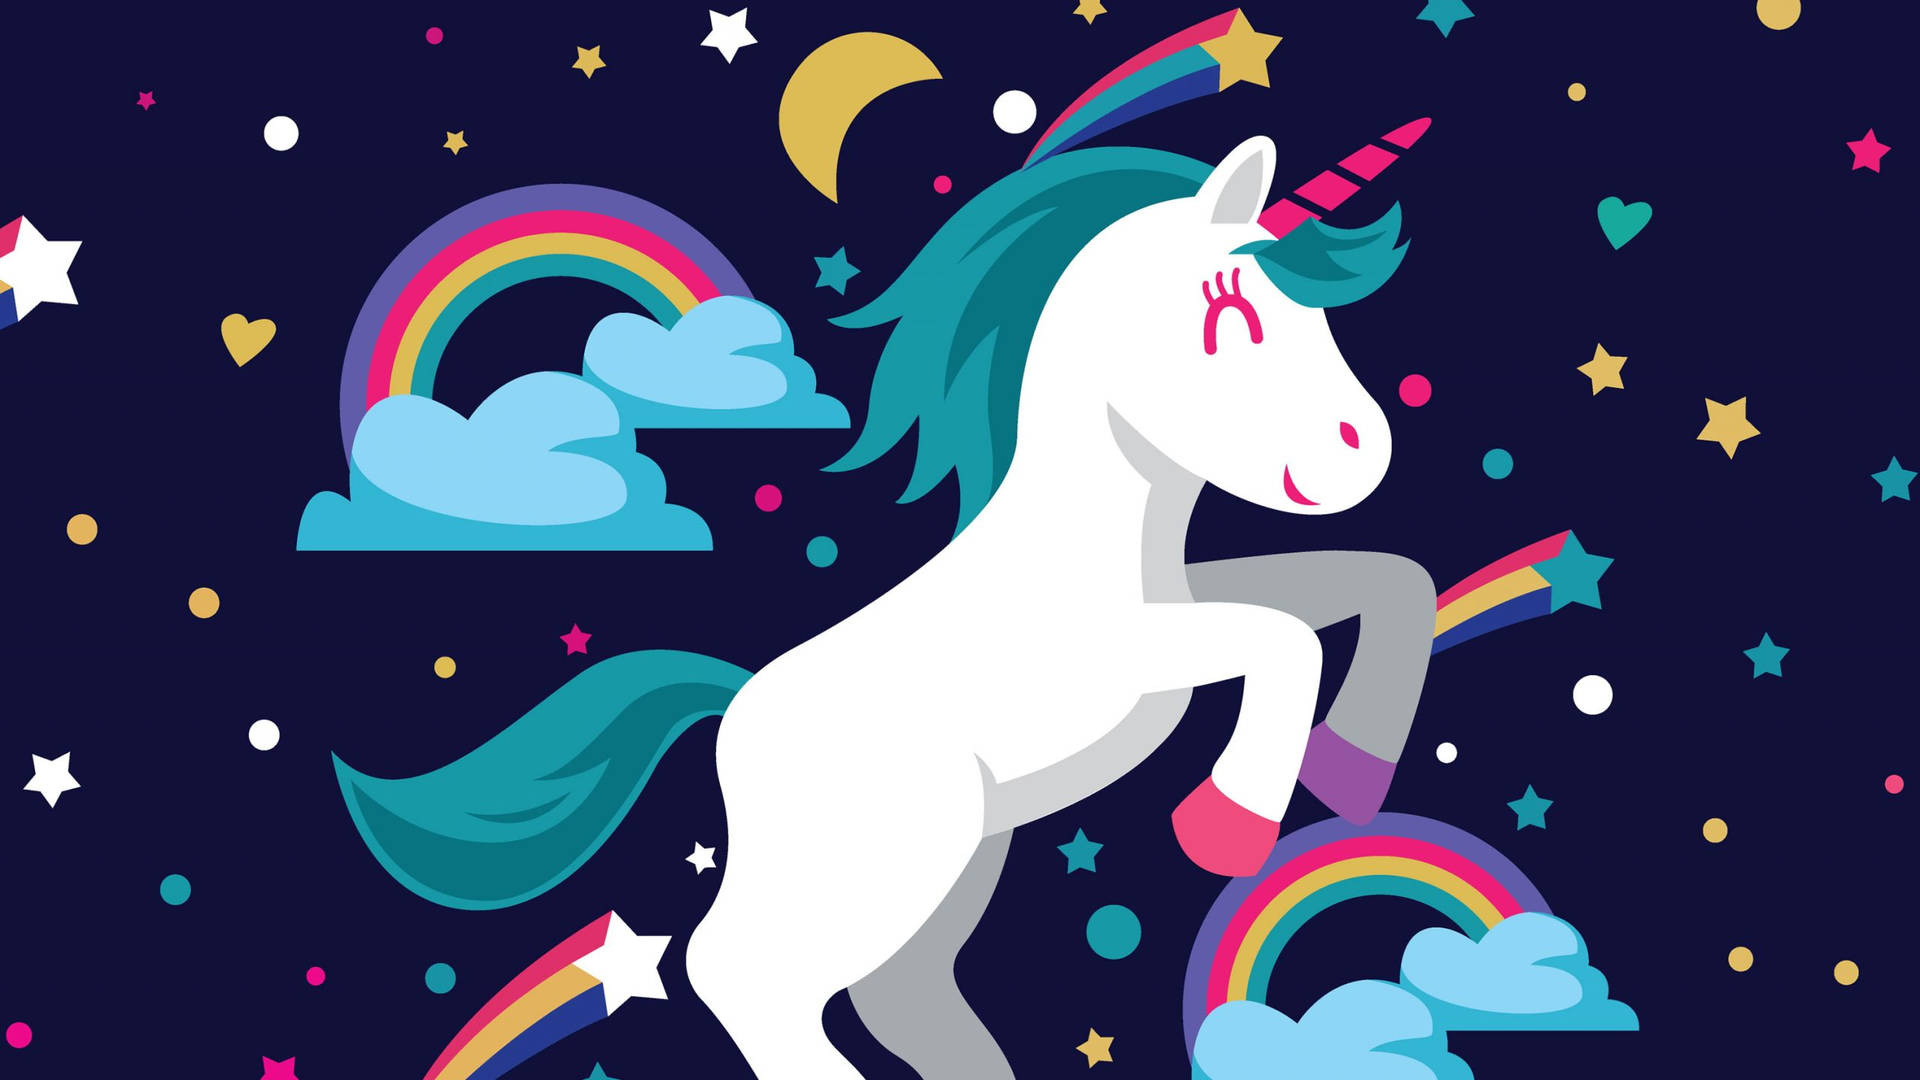 A white unicorn with a blue mane and tail, standing on its hind legs, surrounded by rainbows, clouds, stars, and the moon. - Unicorn